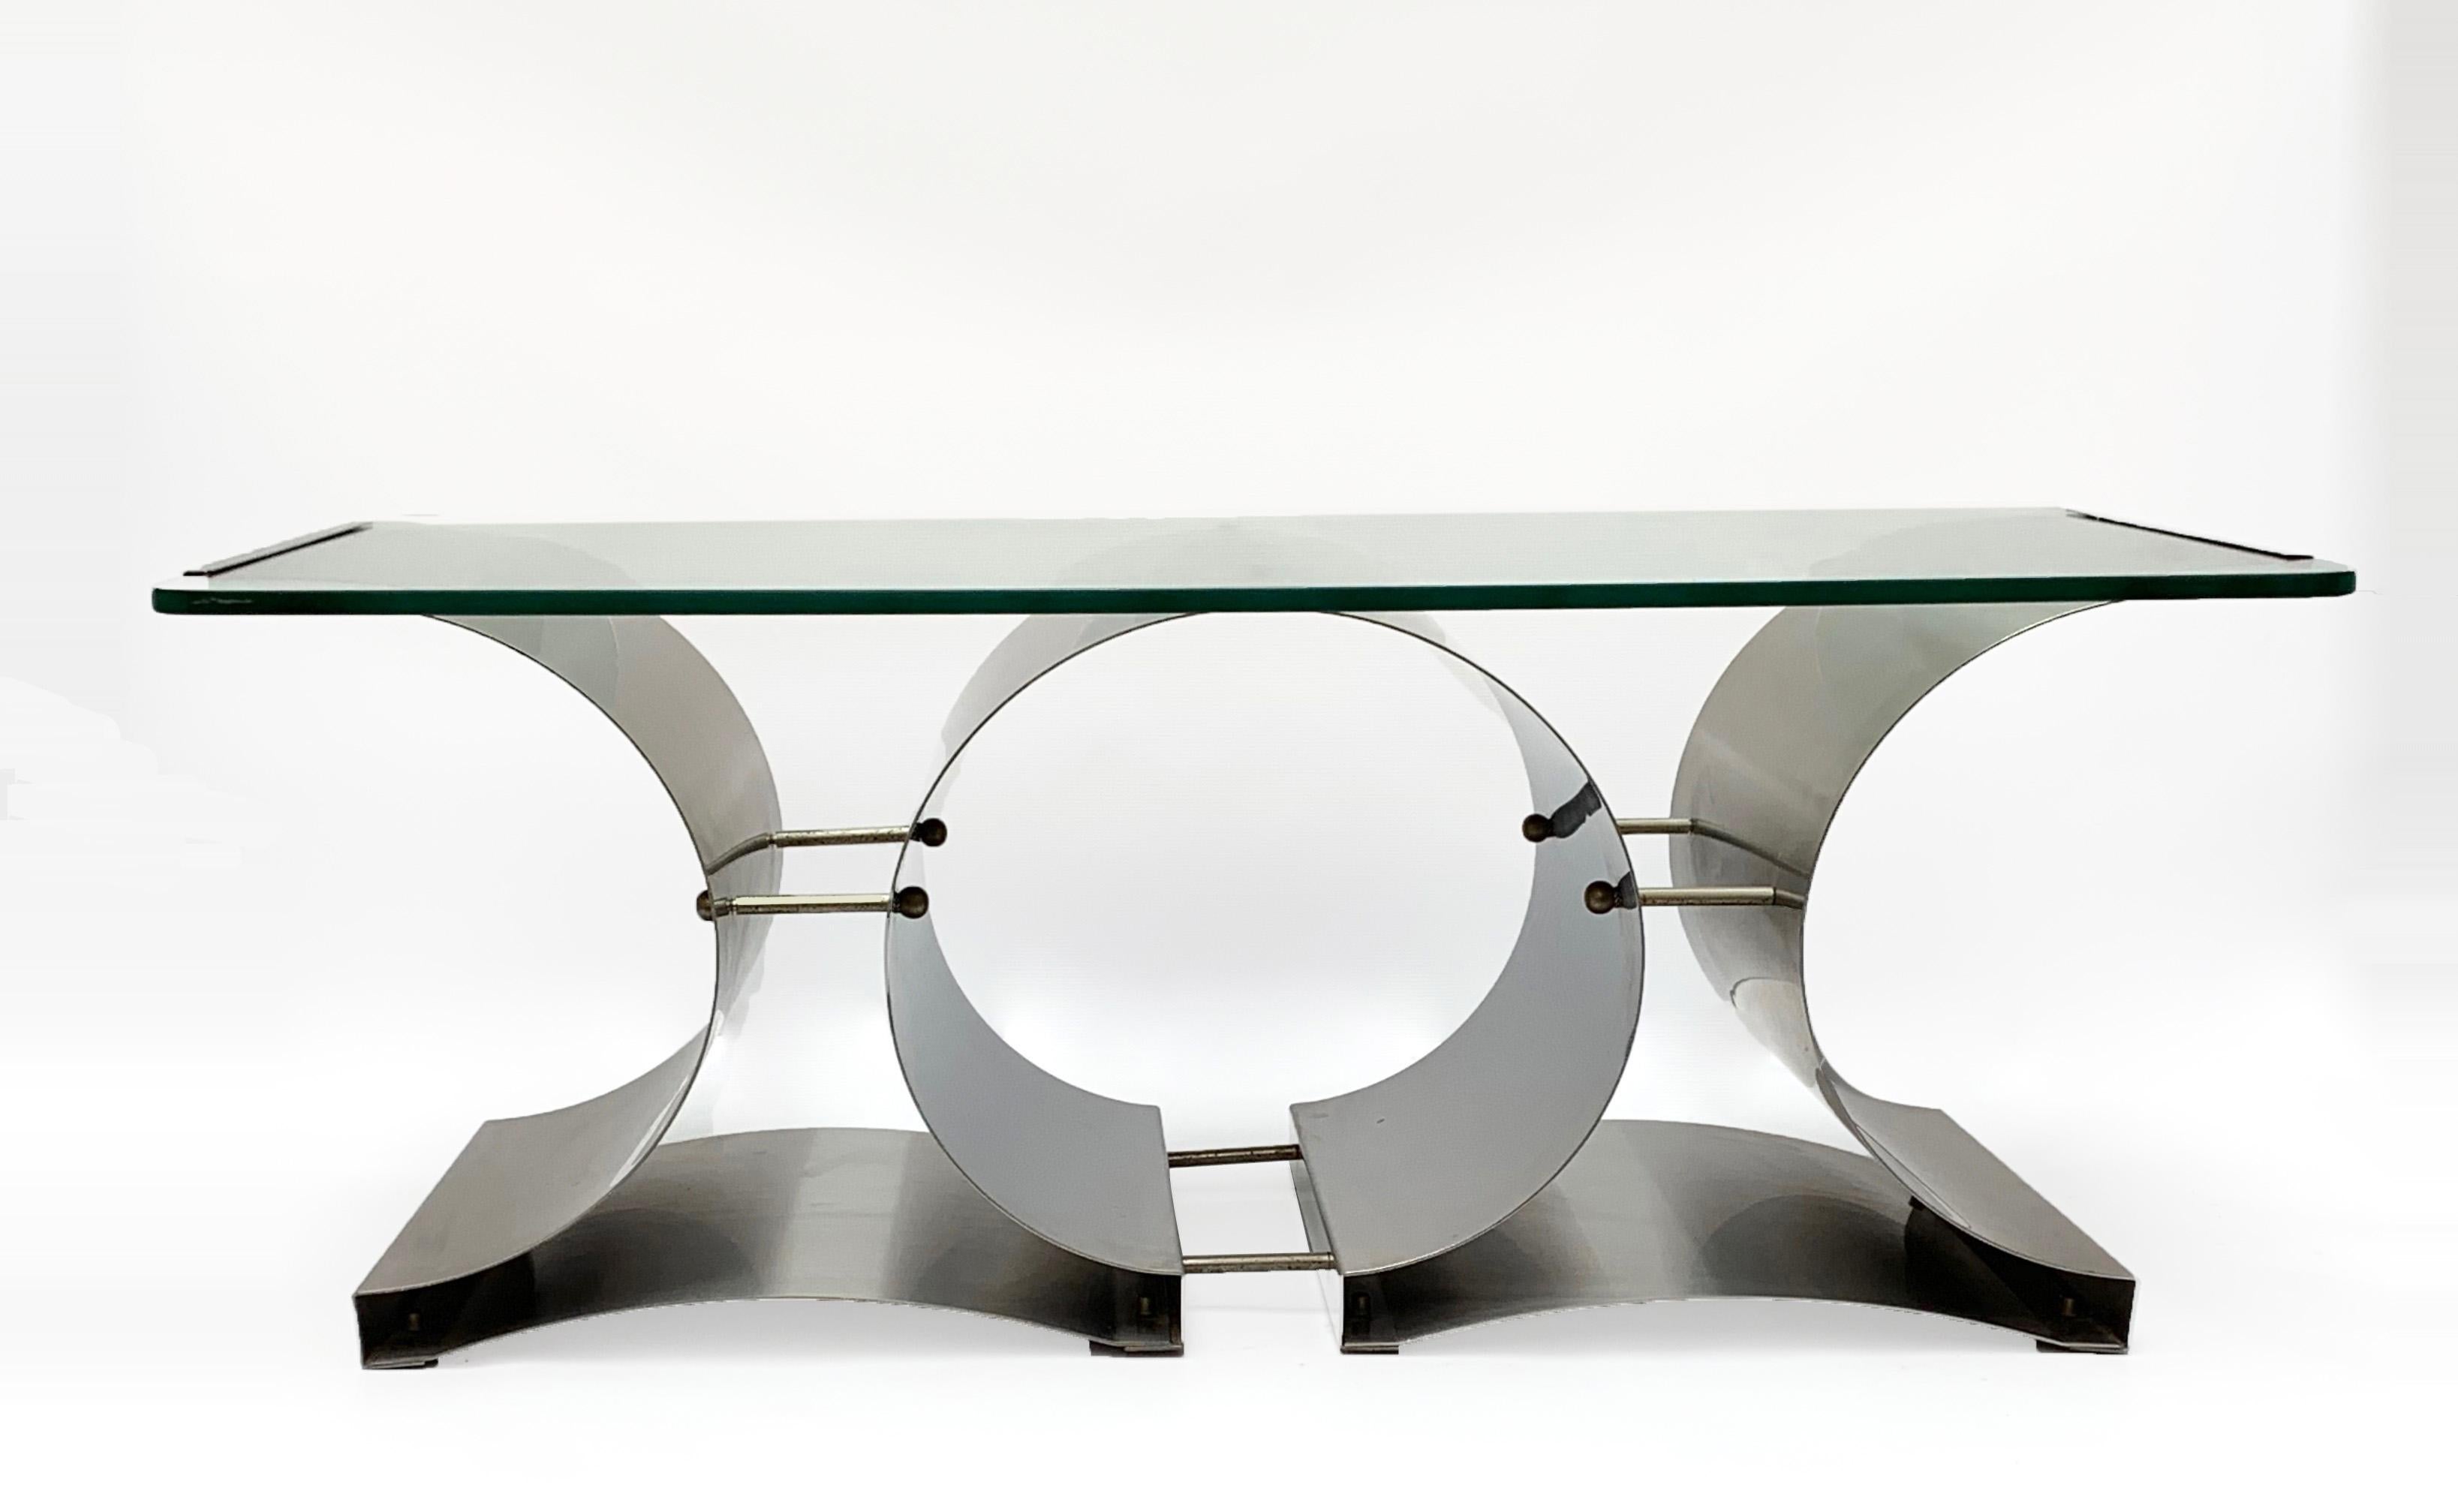 This high quality table is made of brushed stainless steel; the transparent glass top lets you see the beauty of the structure. In the best original conditions. The table shows a clear and futuristic design.
Measurements: Width 104 cm, depth 60 cm,